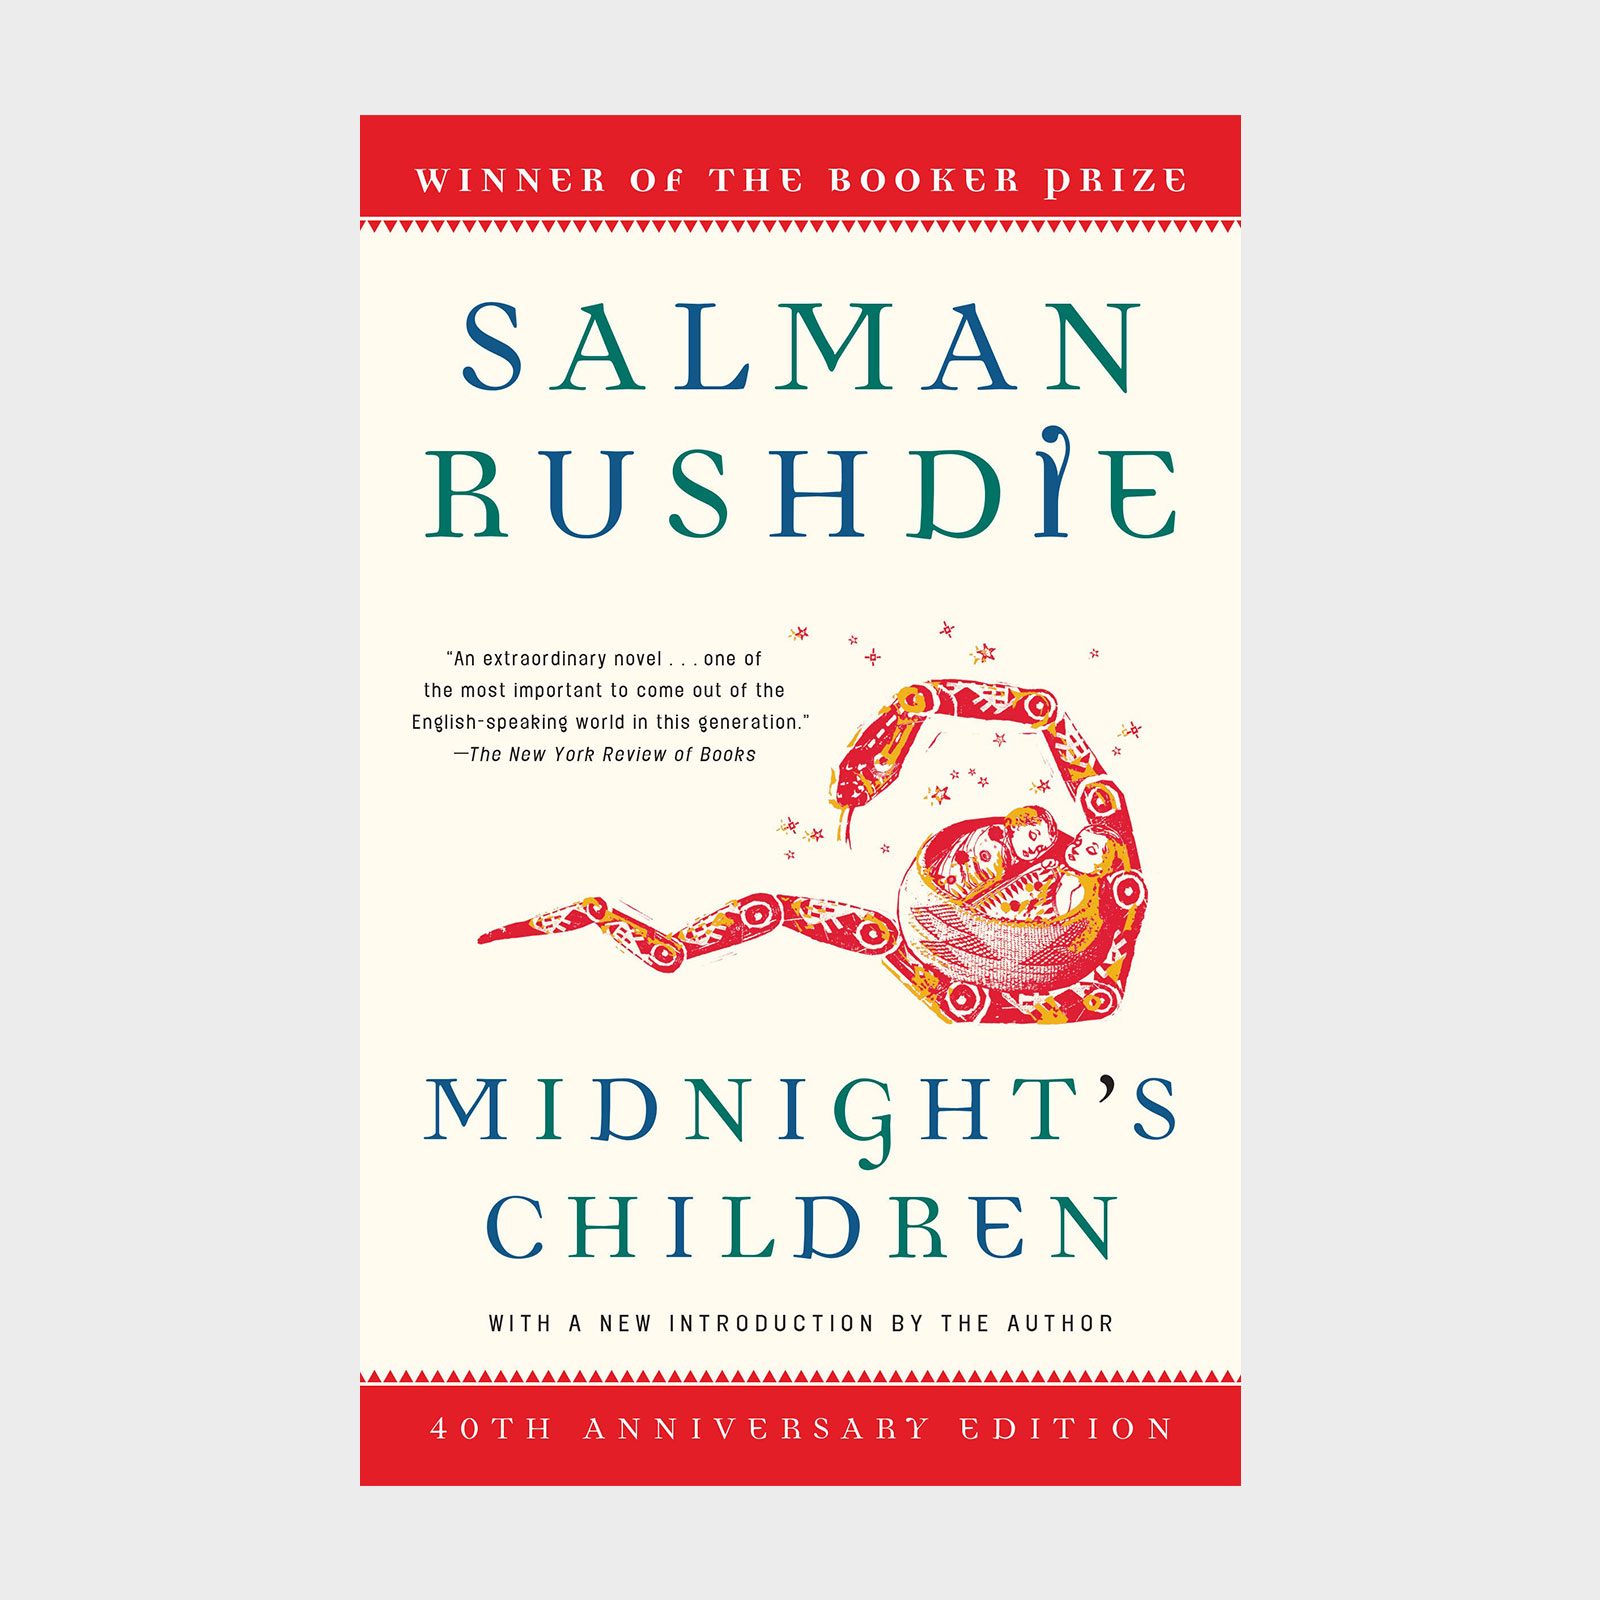 <p class="">Salman Rushdie counted <em>One Hundred Years of Solitude</em> as an inspiration for his multigenerational novel, which won him the Booker Prize in 1981, the year it was published. The book blends historical events, like the peaceful protest of Mahatma Gandhi, with magical elements and tells the post-colonial story of Saleem, who was born at the exact moment of India's independence (midnight) and who, along with a thousand other "midnight children," possesses special powers. When it comes to magical realism books, you're bound to find <a href="https://www.amazon.com/Midnights-Children-Modern-Library-Novels/dp/0812976533" rel="noopener noreferrer"><em>Midnight's Children</em></a> on any <a href="https://www.rd.com/list/book-recommendations/" rel="noopener noreferrer">book recommendations</a> list worth its salt.</p> <p class="listicle-page__cta-button-shop"><a class="shop-btn" href="https://www.amazon.com/Midnights-Children-Modern-Library-Novels/dp/0812976533">Shop Now</a></p>